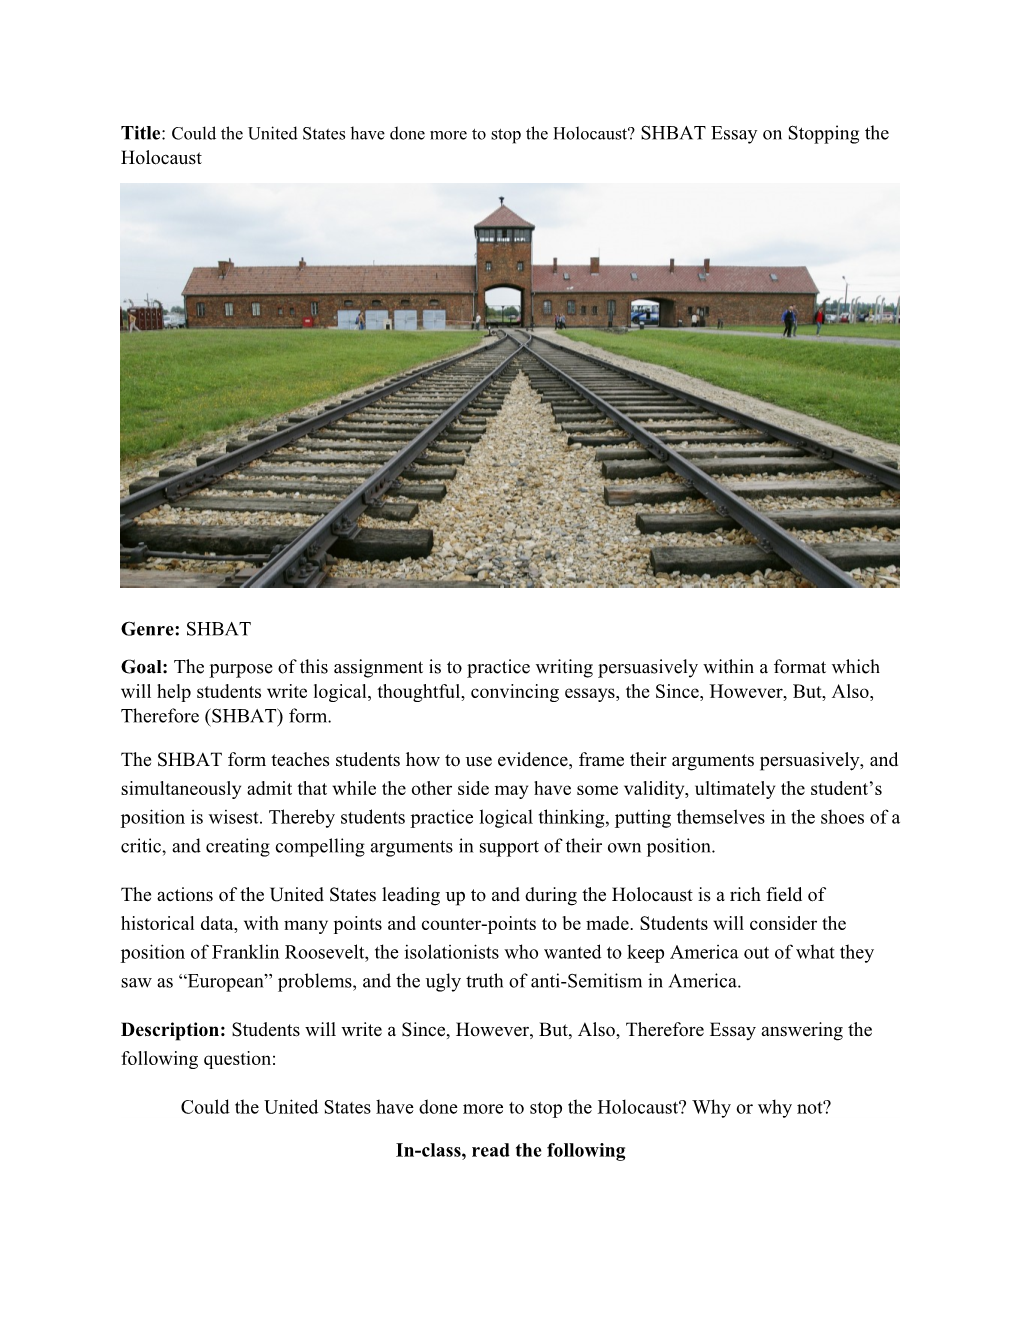 Title: Could the United States Have Done More to Stop the Holocaust? SHBAT Essay on Stopping